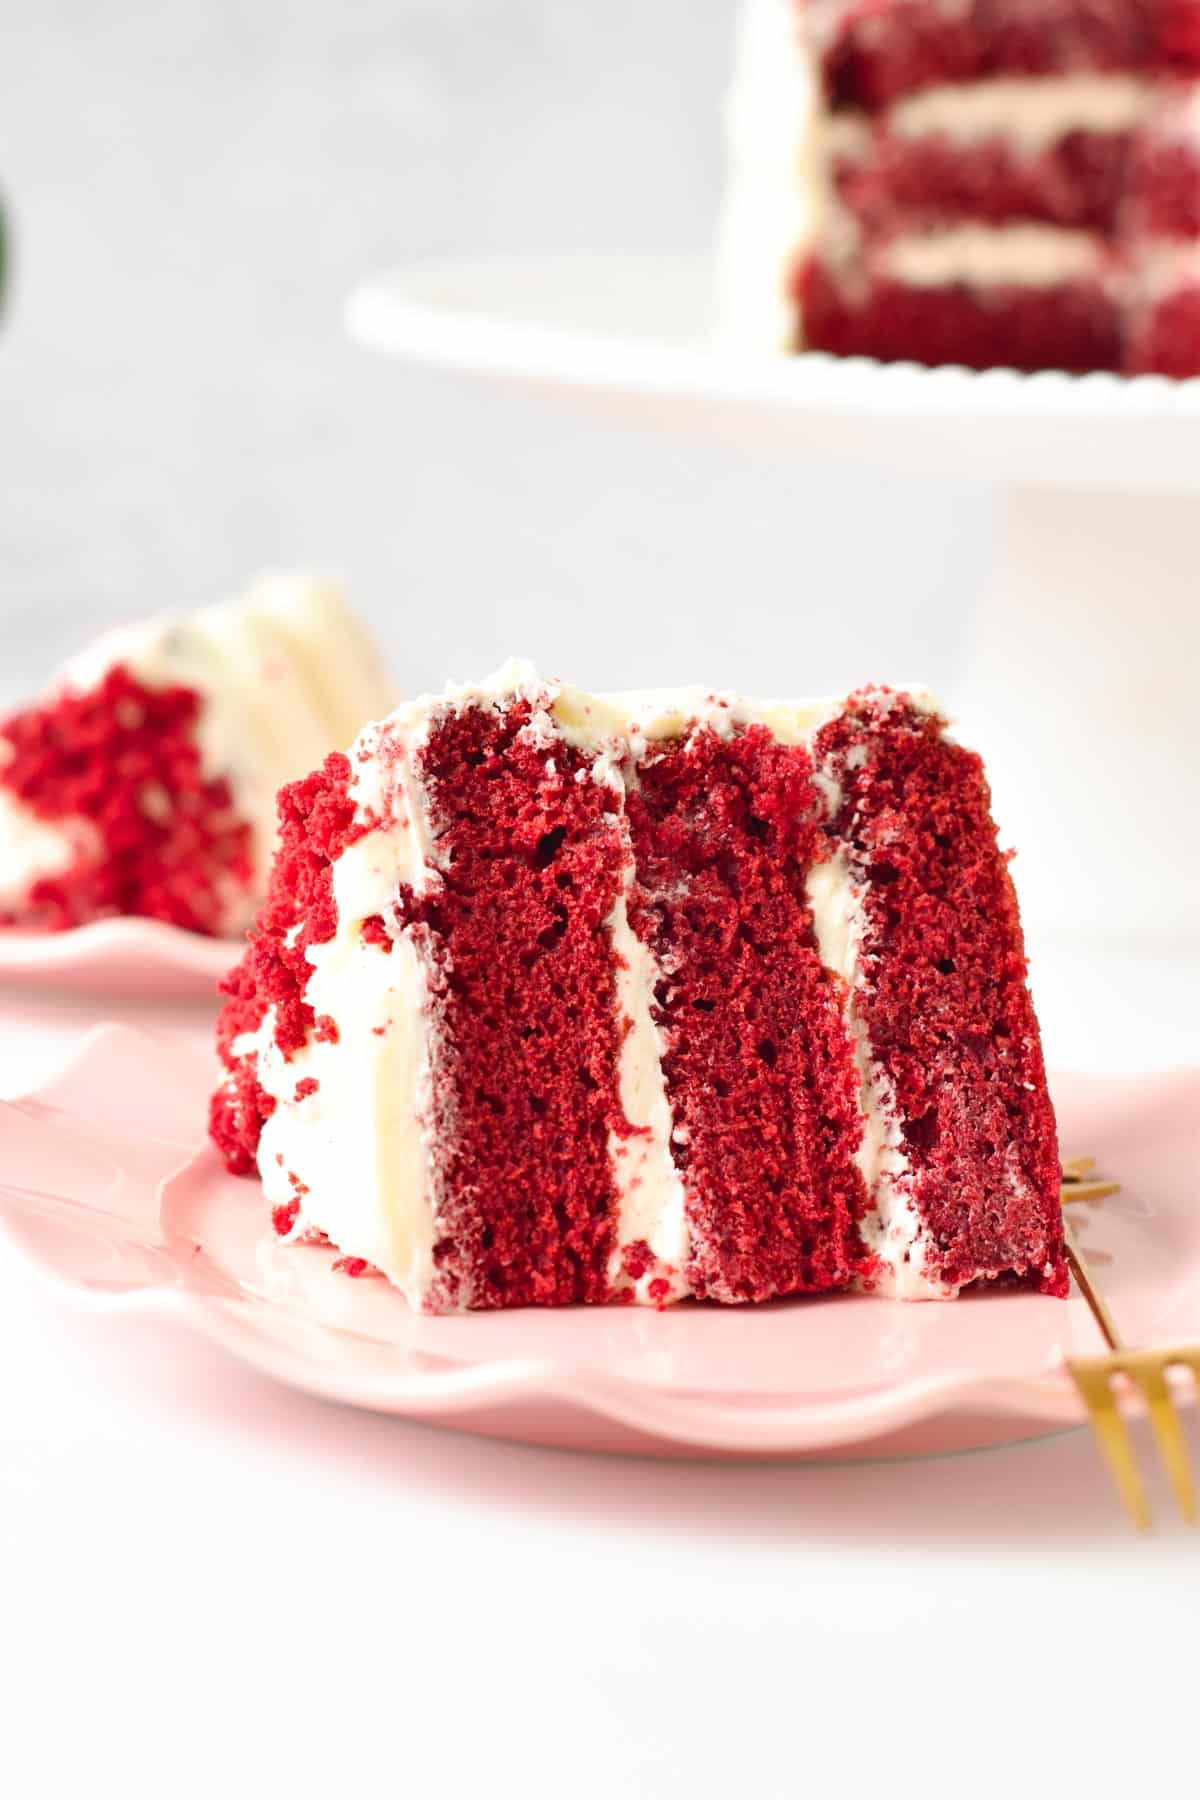 A slice of vegan red velvet cake with three layers and filled with dairy-free cream cheese frosting.